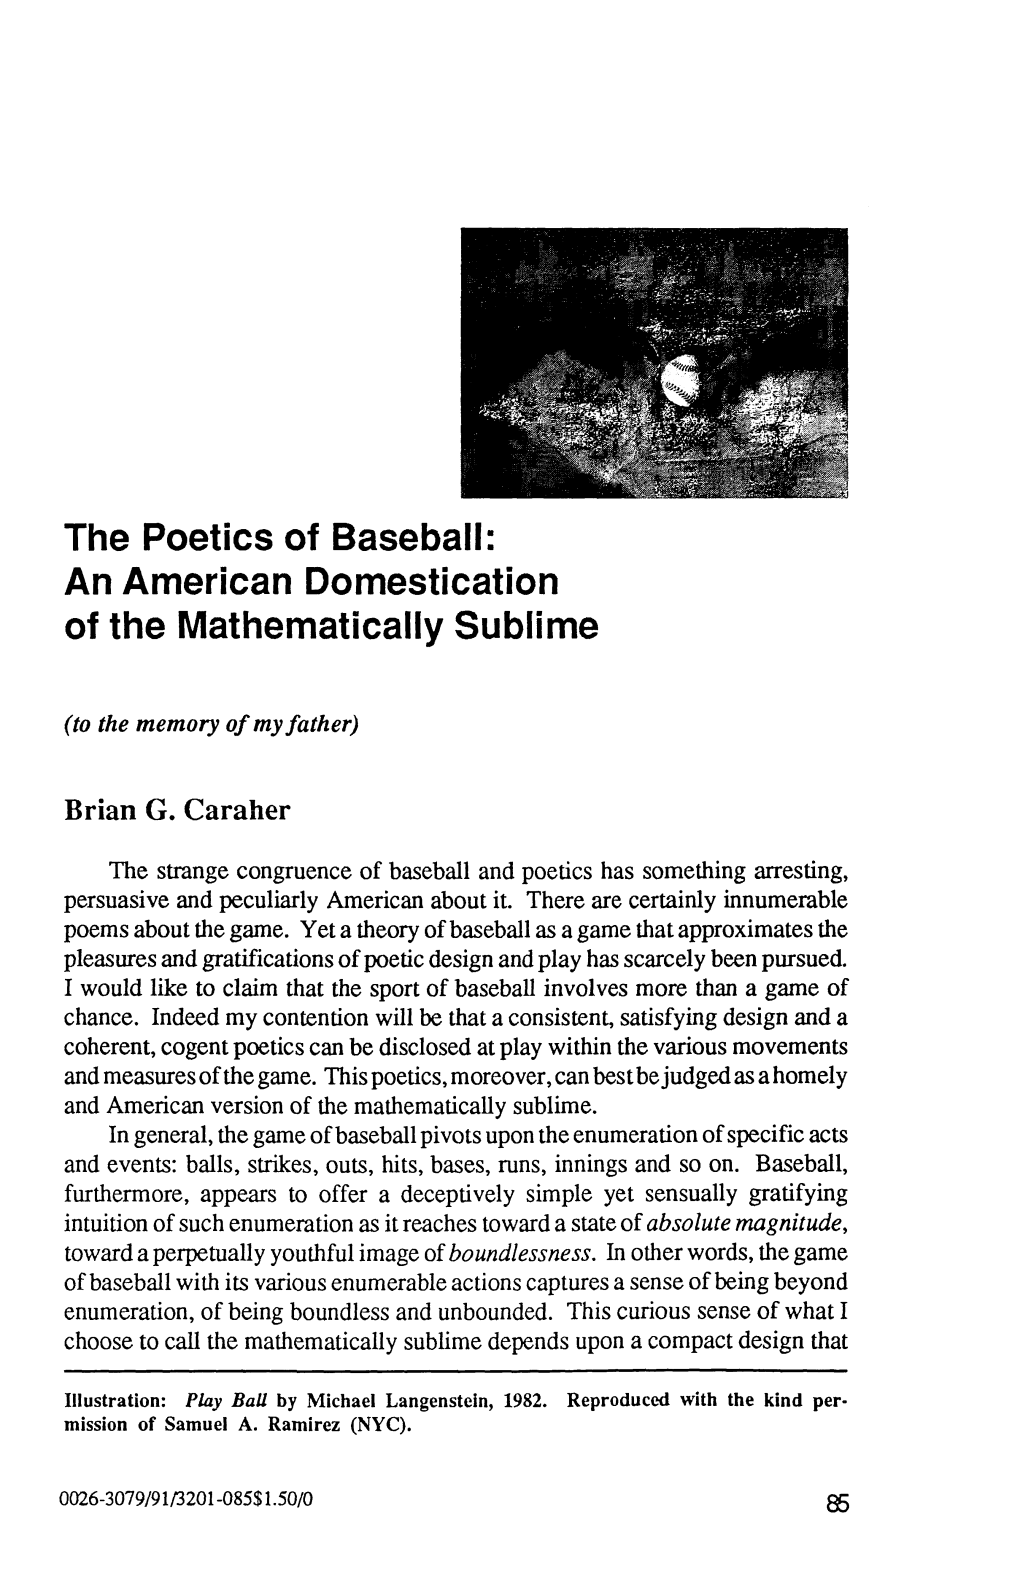 The Poetics of Baseball: an American Domestication of the Mathematically Sublime